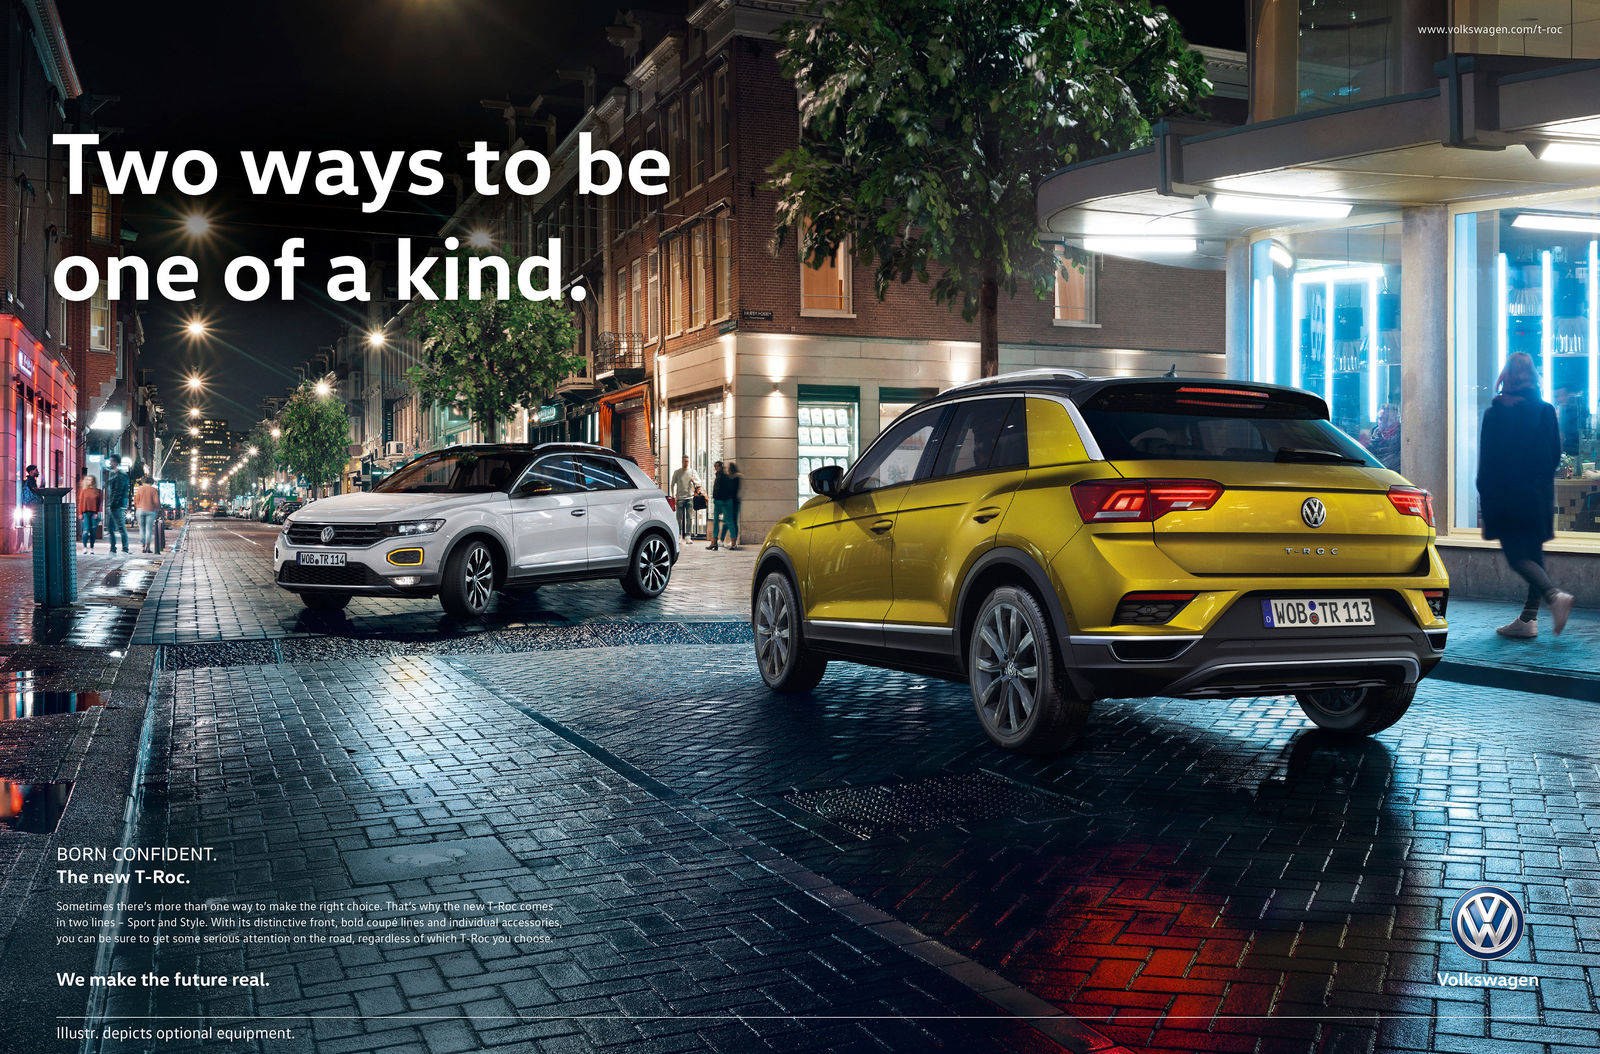 Volkswagen launches international marketing campaign for new T-Roc